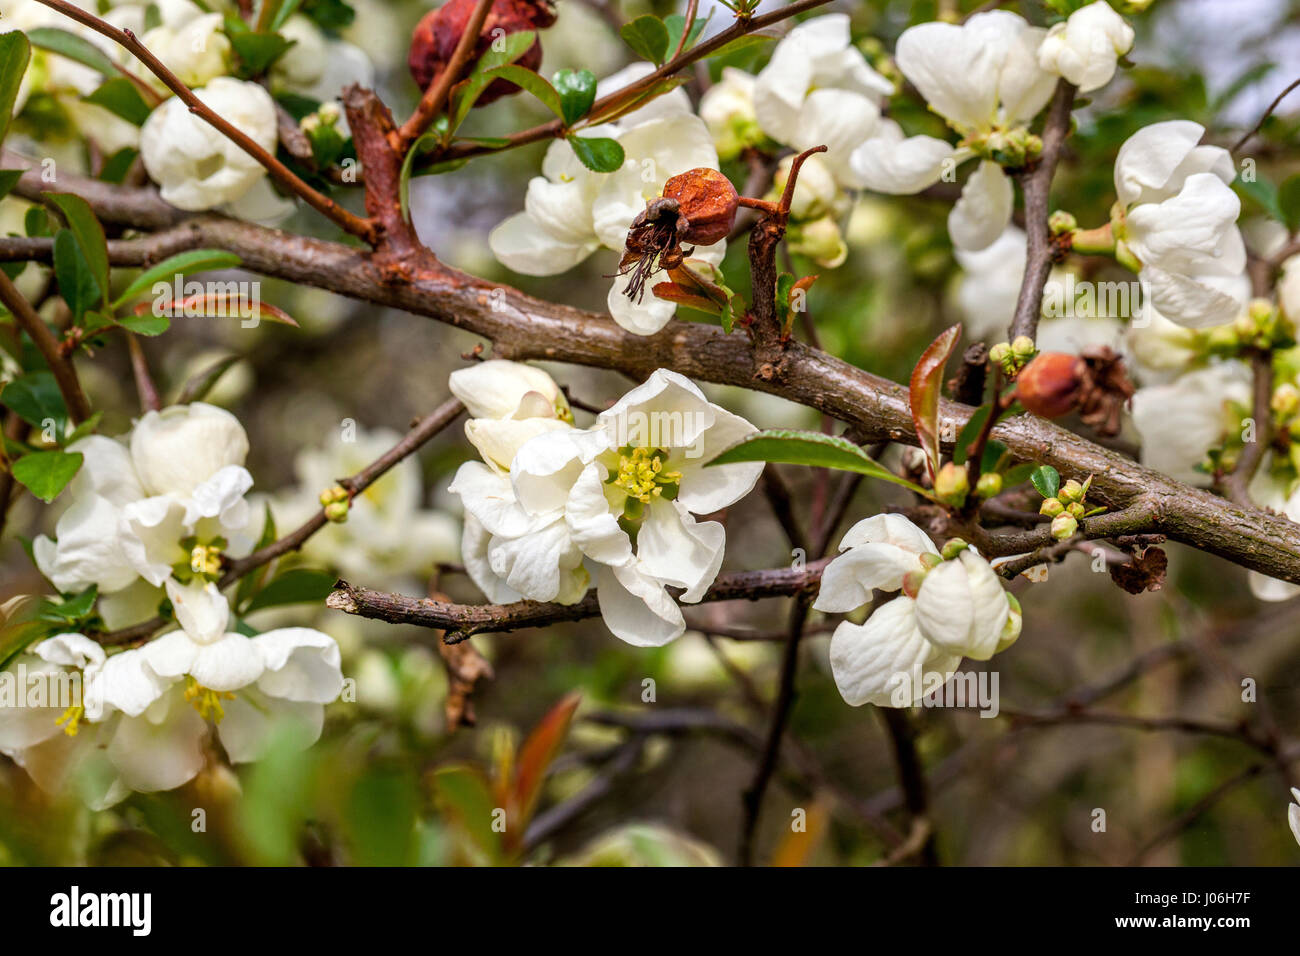 Flowering quince Chaenomeles superba 'Jet trail' in a garden Stock Photo